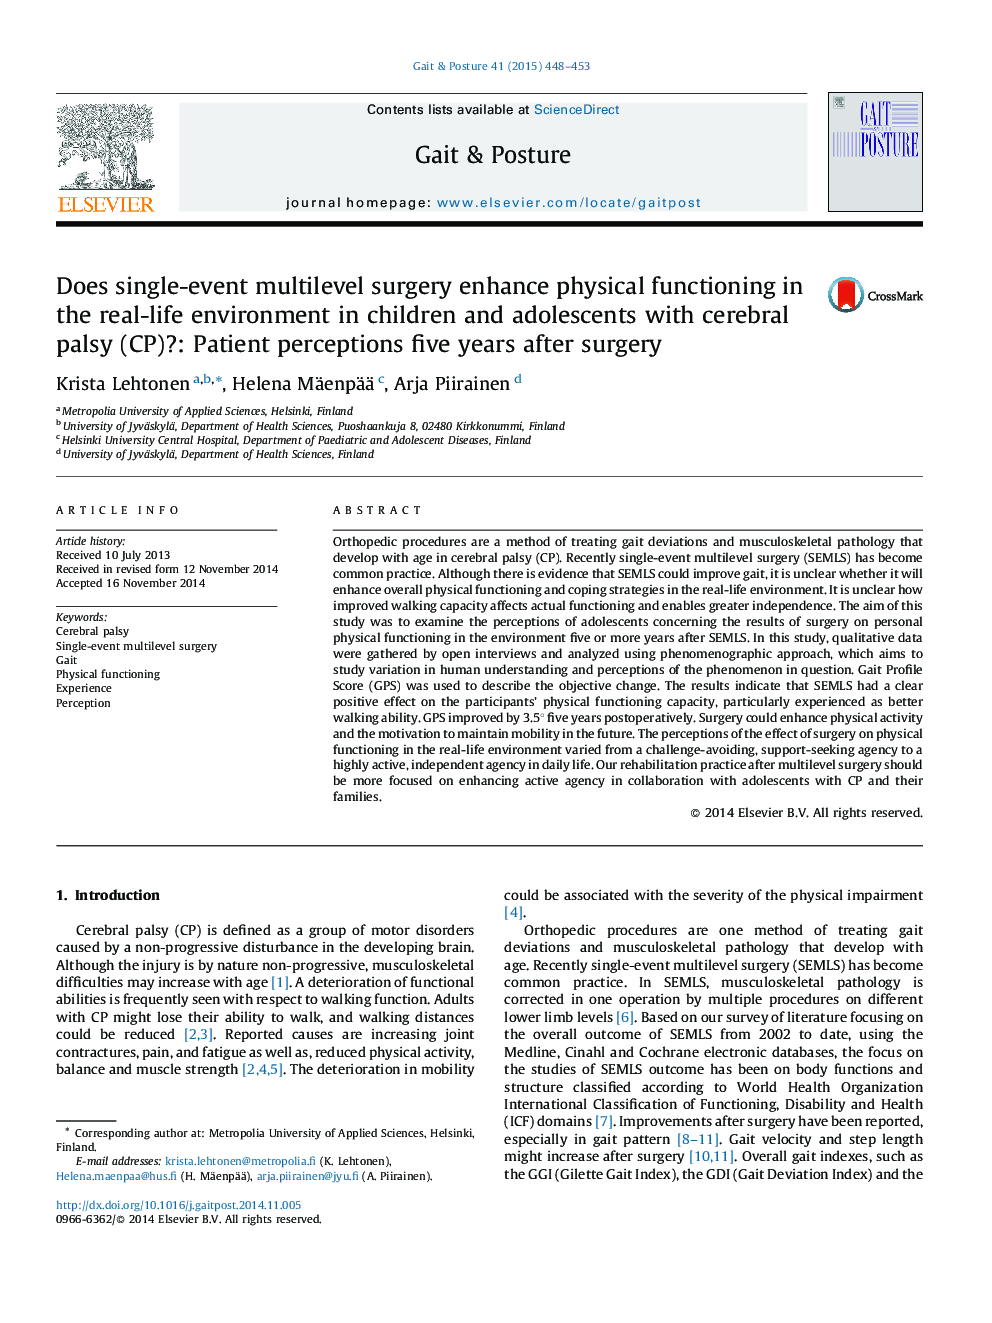 Does single-event multilevel surgery enhance physical functioning in the real-life environment in children and adolescents with cerebral palsy (CP)?: Patient perceptions five years after surgery